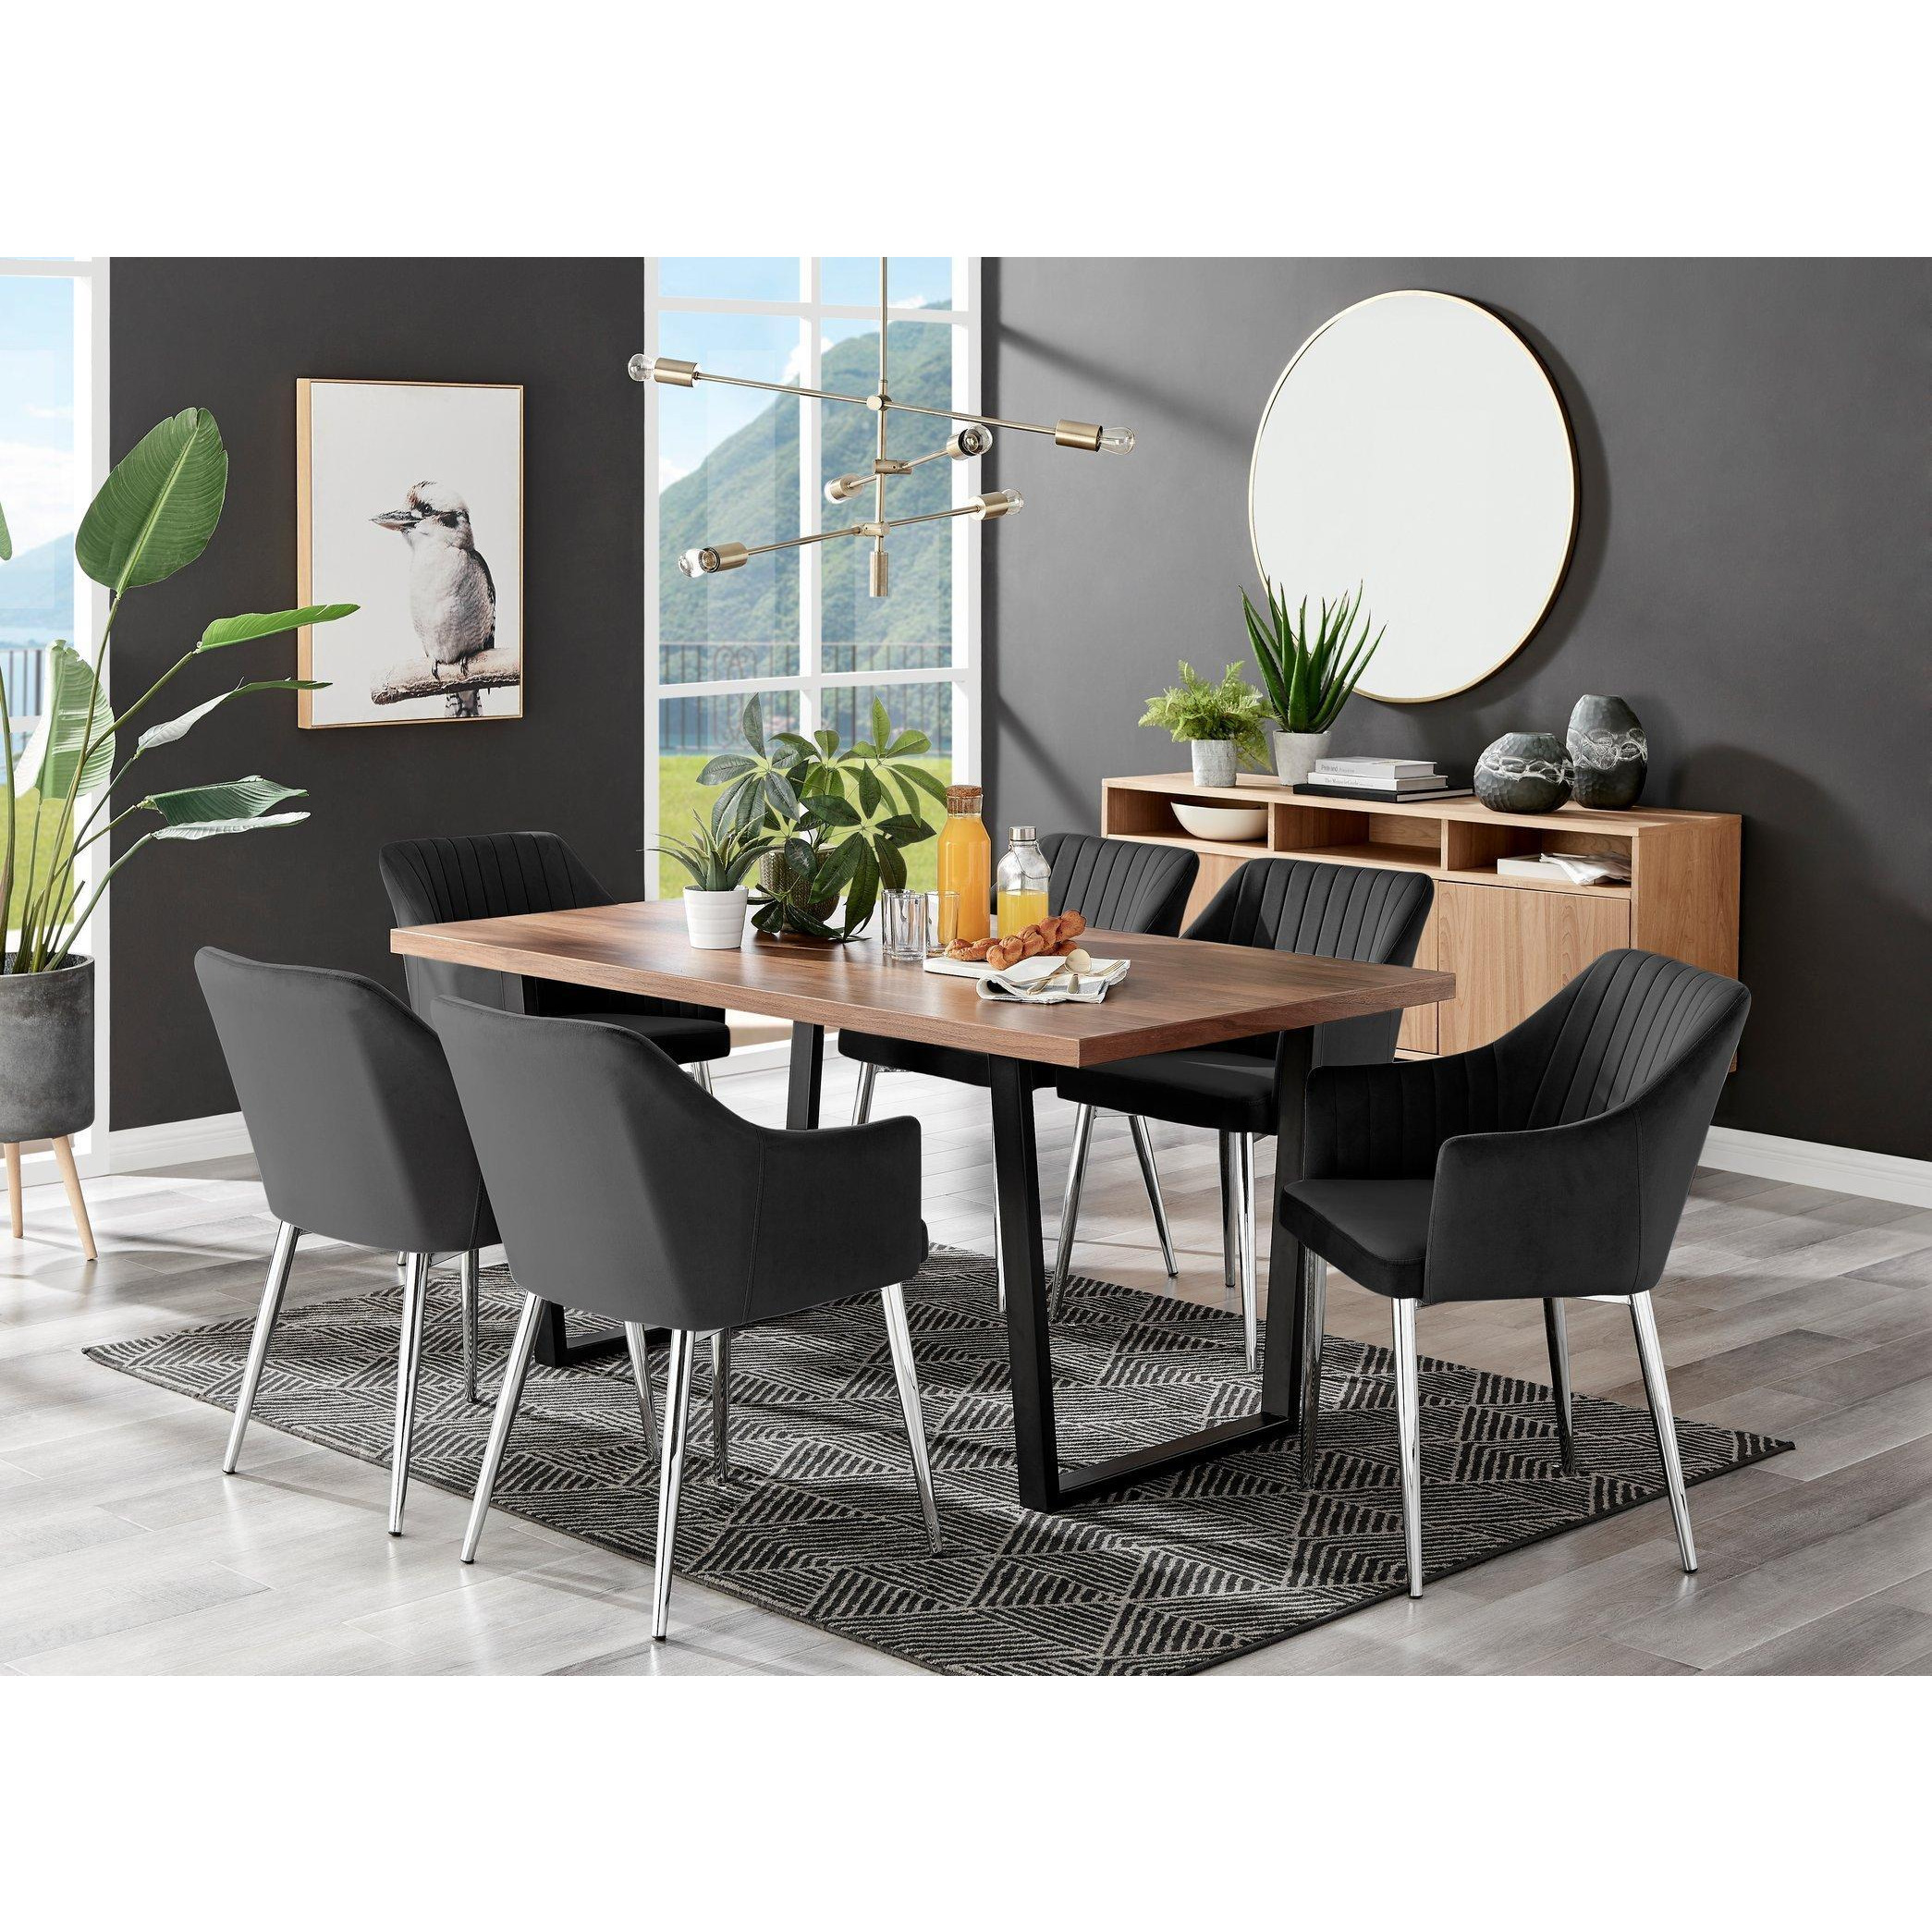 Kylo Large Brown Wood Effect Dining Table & 6 Calla Silver Leg Velvet Chairs - image 1